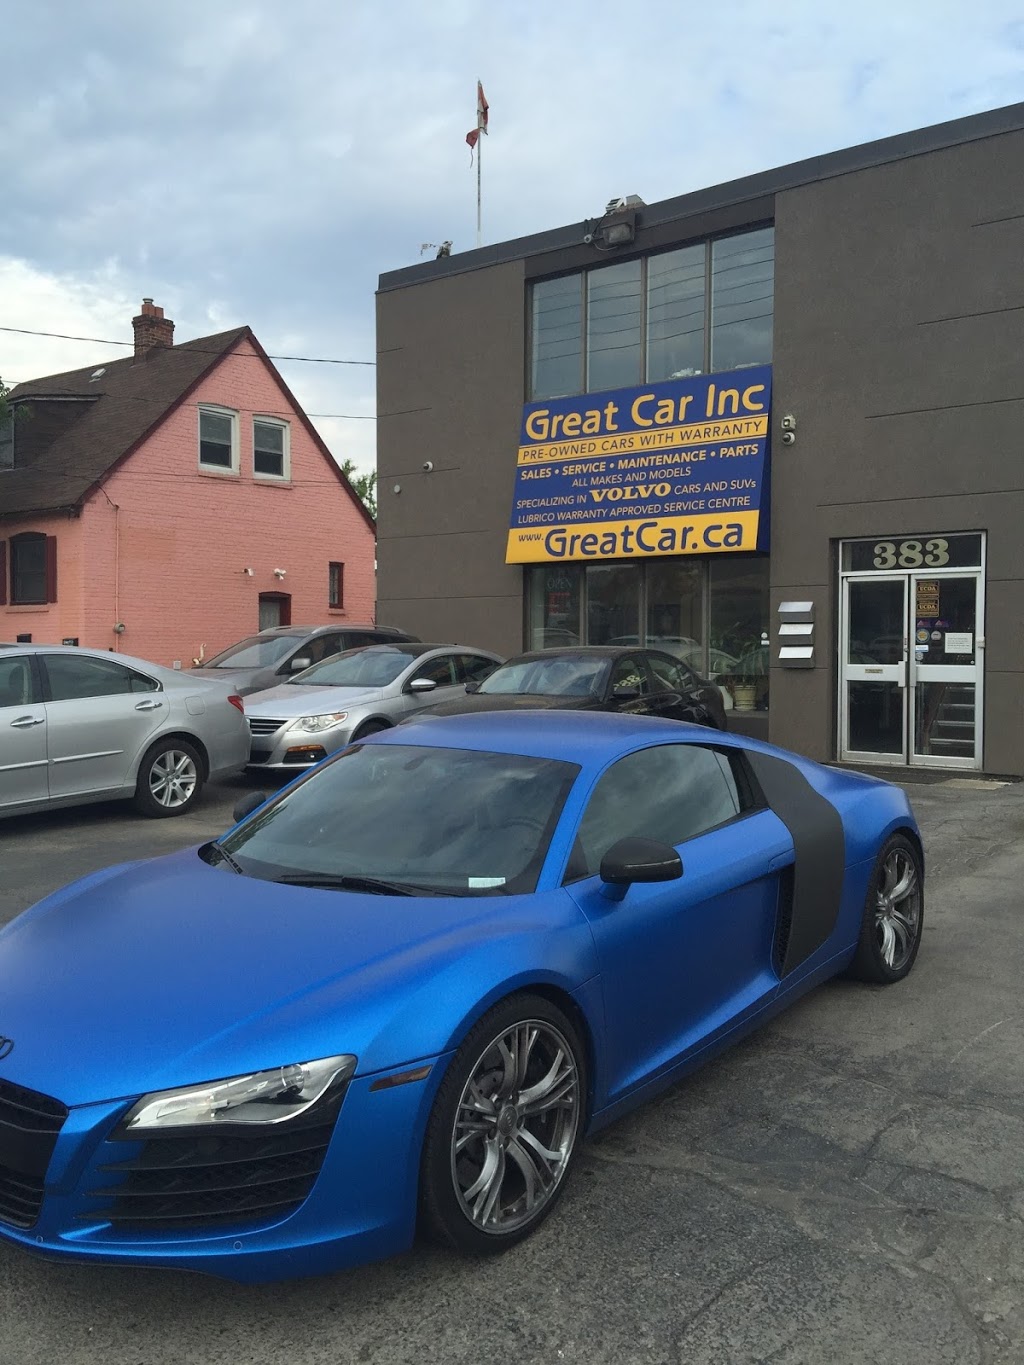 Great Car Inc - USED, CERTIFIED CARS GreatCar.ca | 383 Bering Ave, Etobicoke, ON M8Z 3B1, Canada | Phone: (416) 832-7087